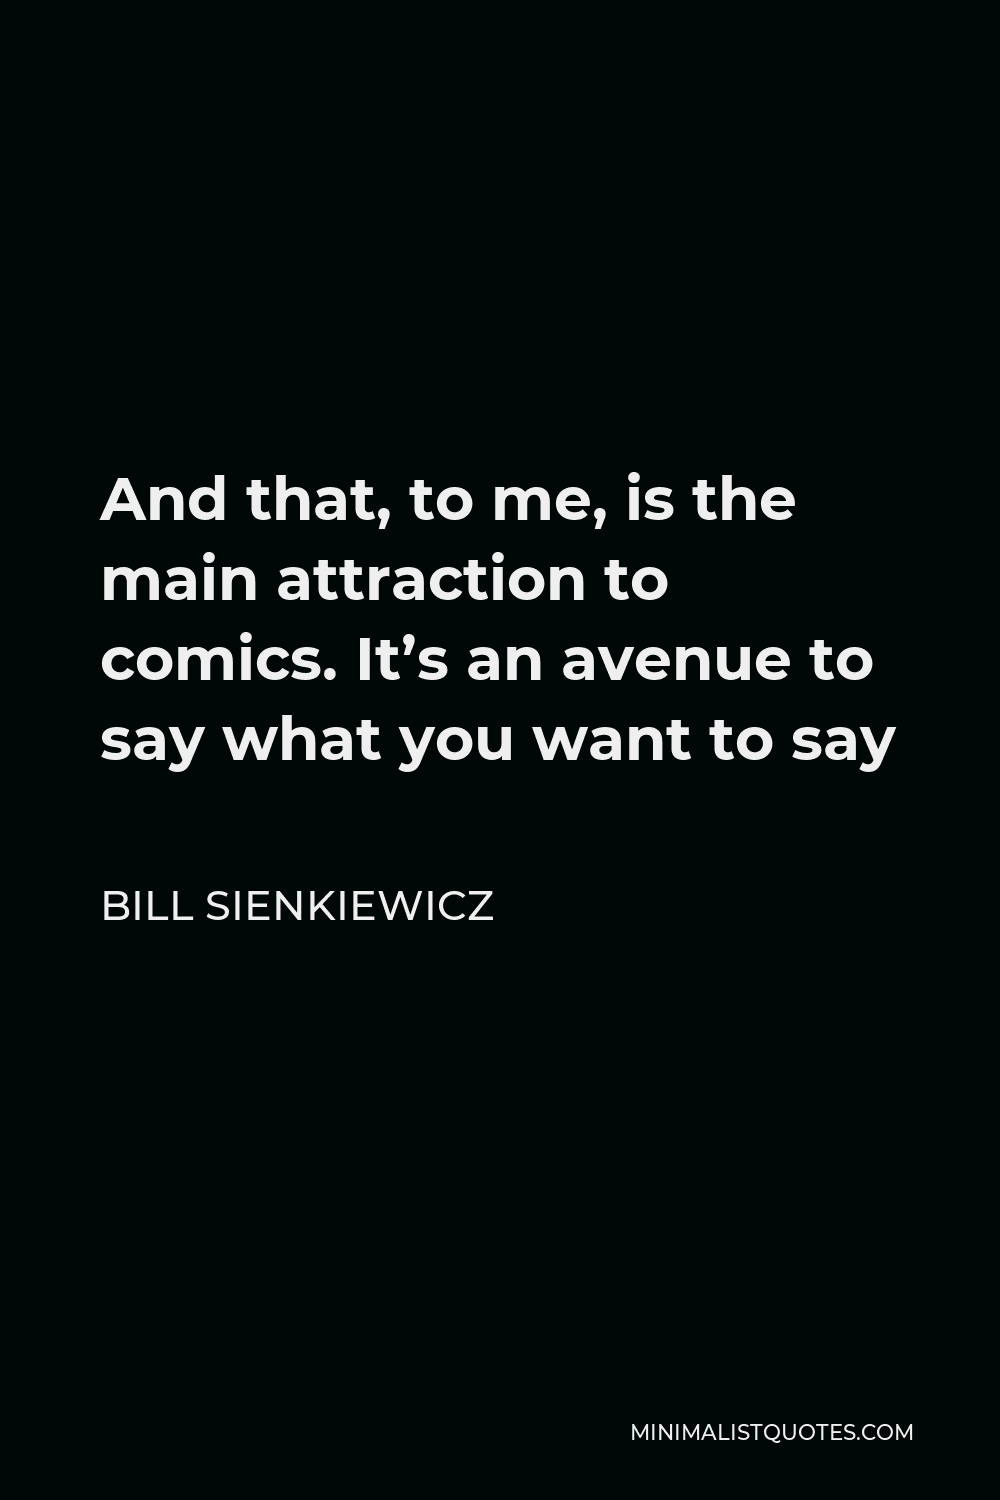 Bill Sienkiewicz Quote - And that, to me, is the main attraction to comics. It’s an avenue to say what you want to say